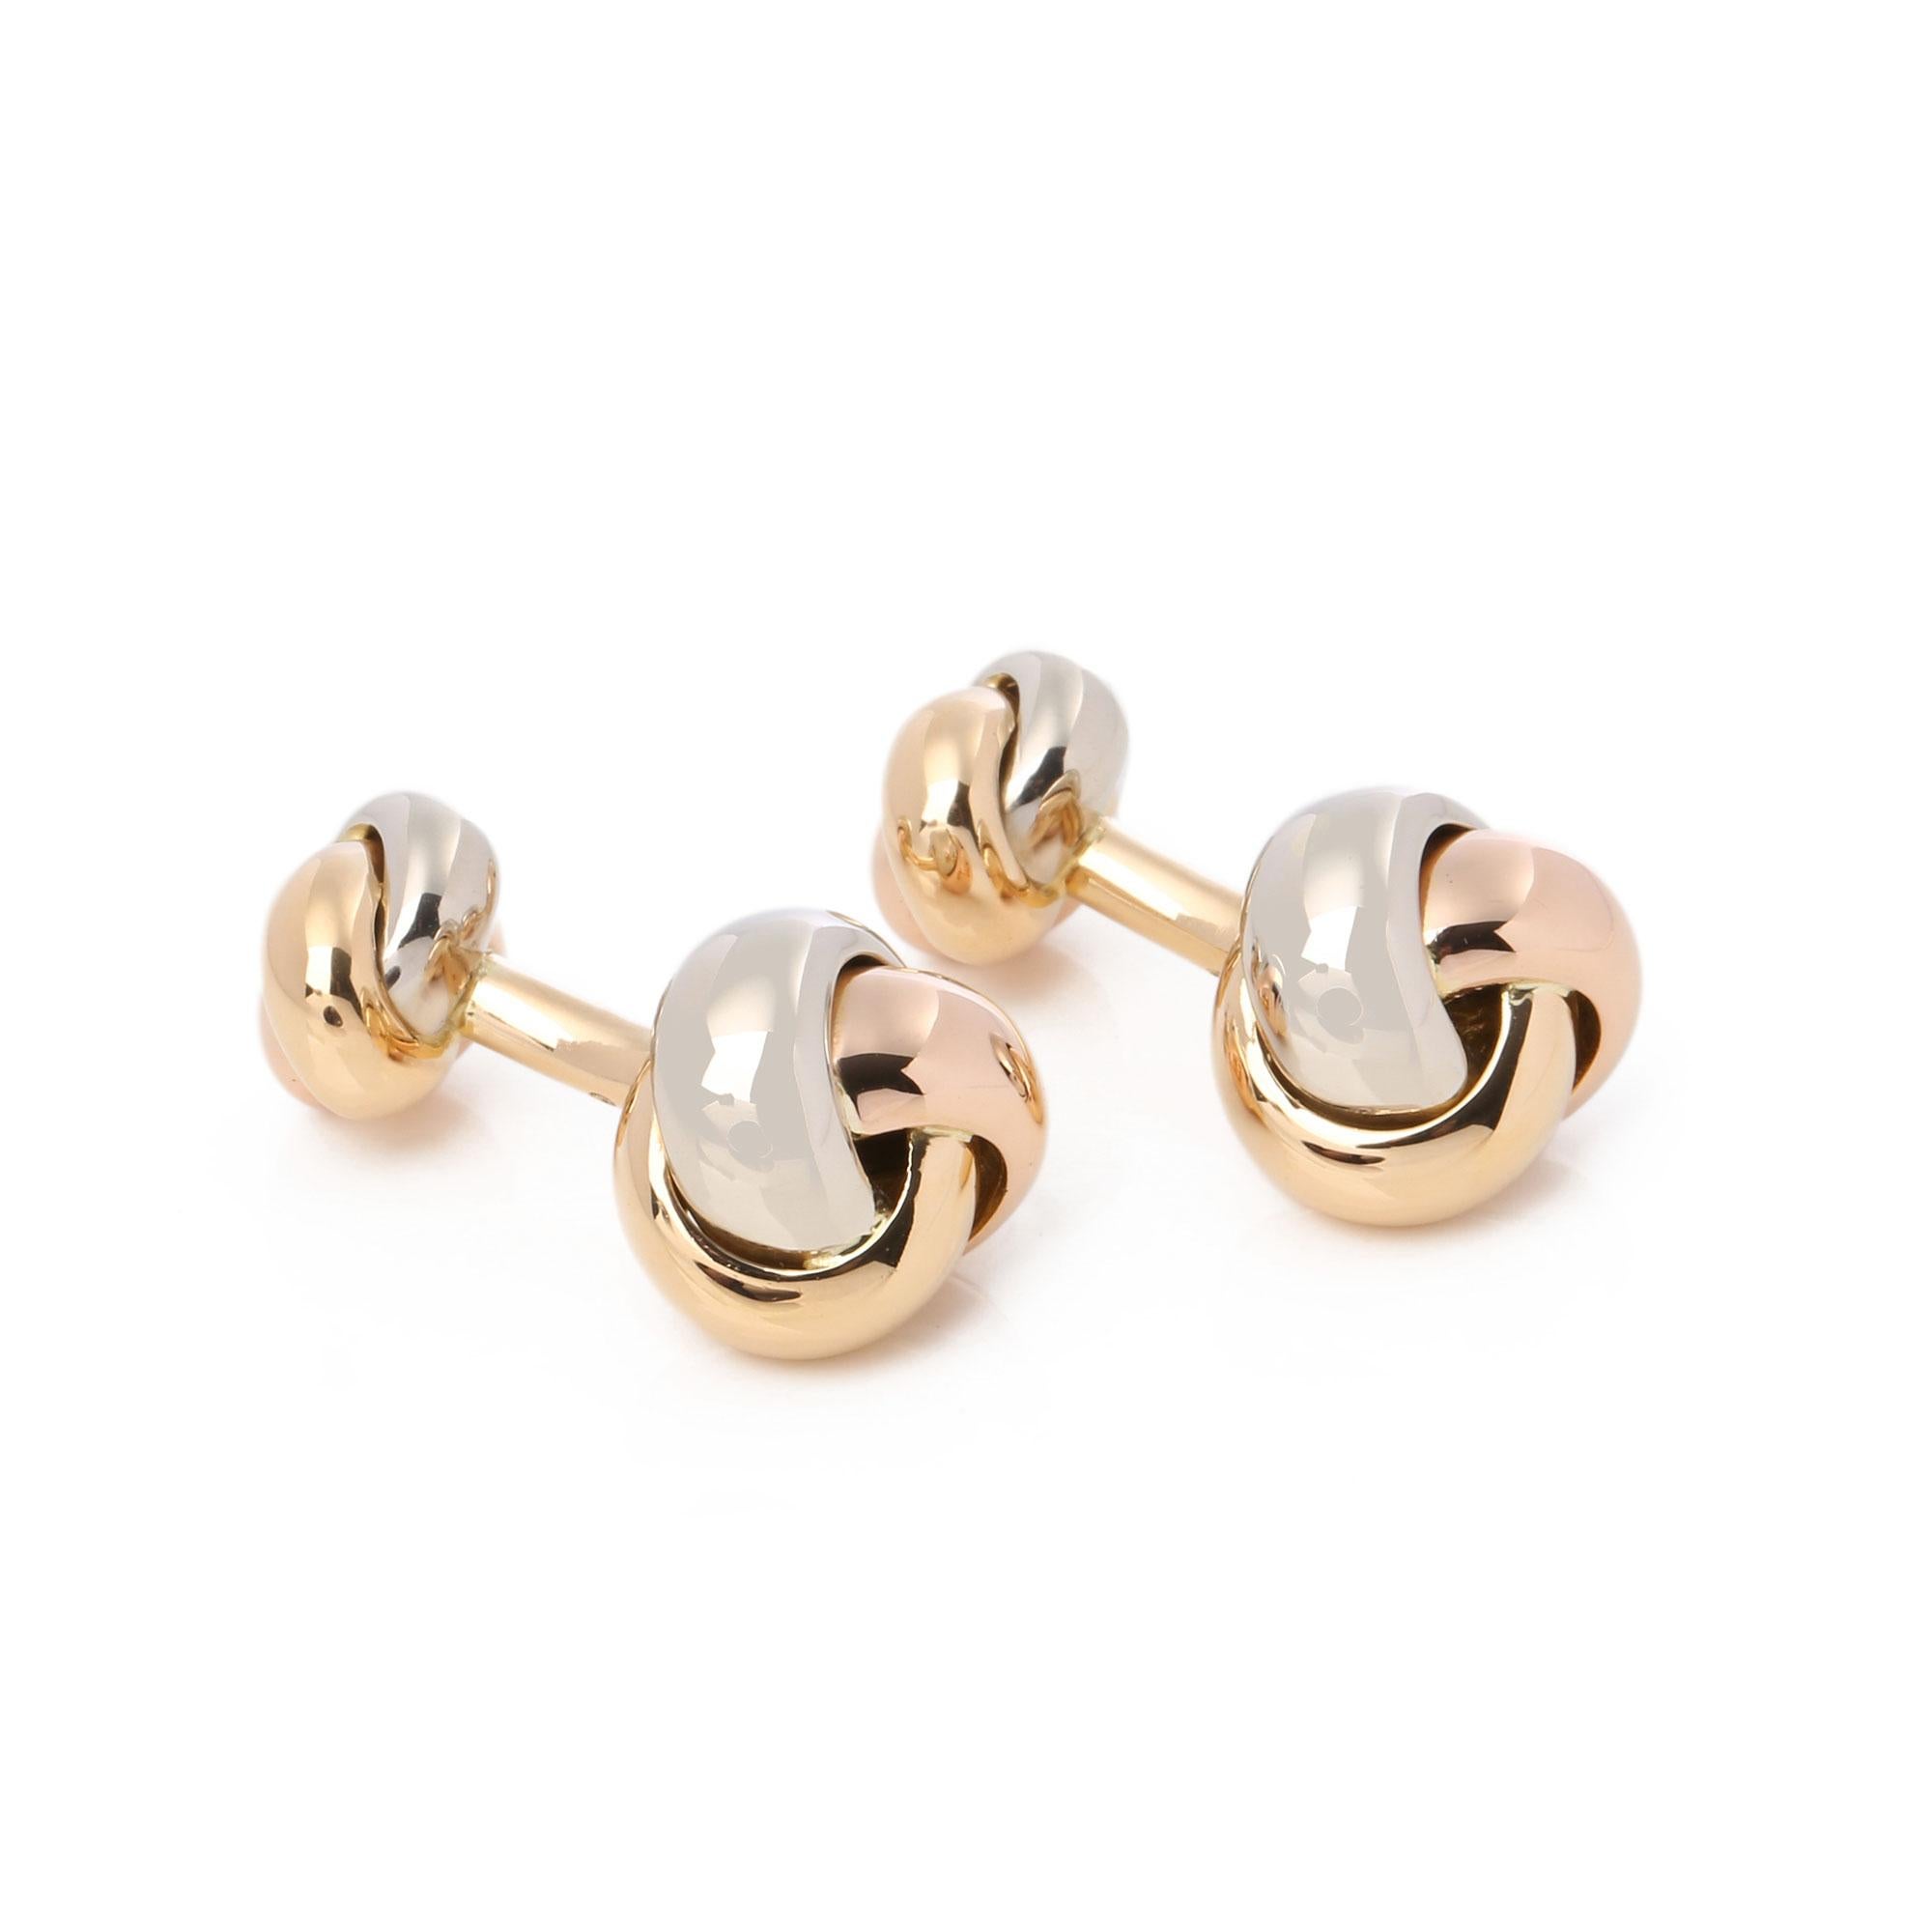 These cufflinks by Cartier are from their Trinity collection and feature the iconic knot design in 18ct white gold, 18ct yellow gold and 18ct rose gold. 